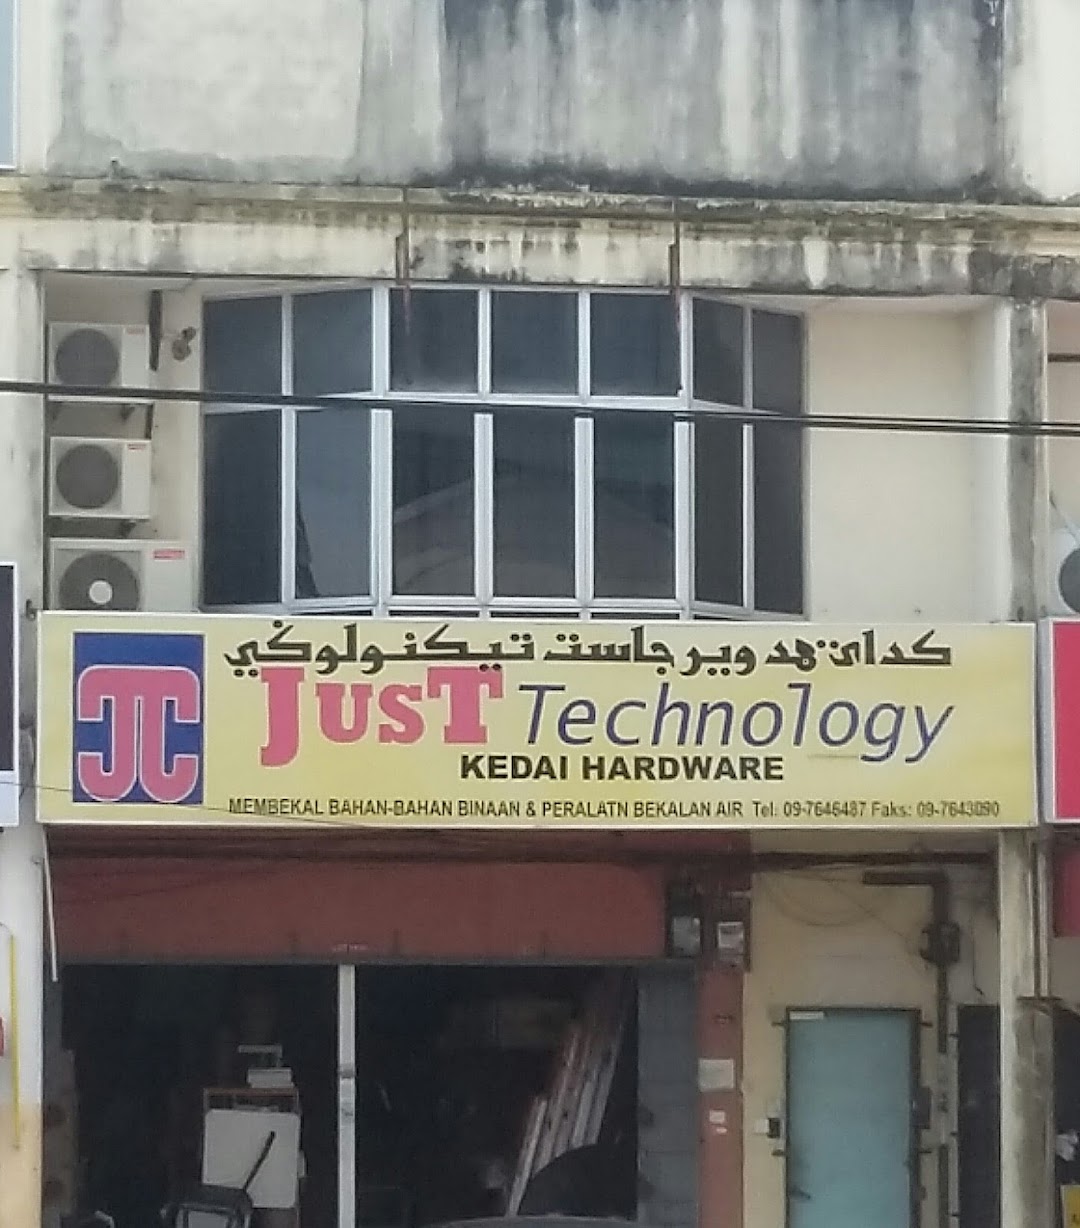 Just Technology